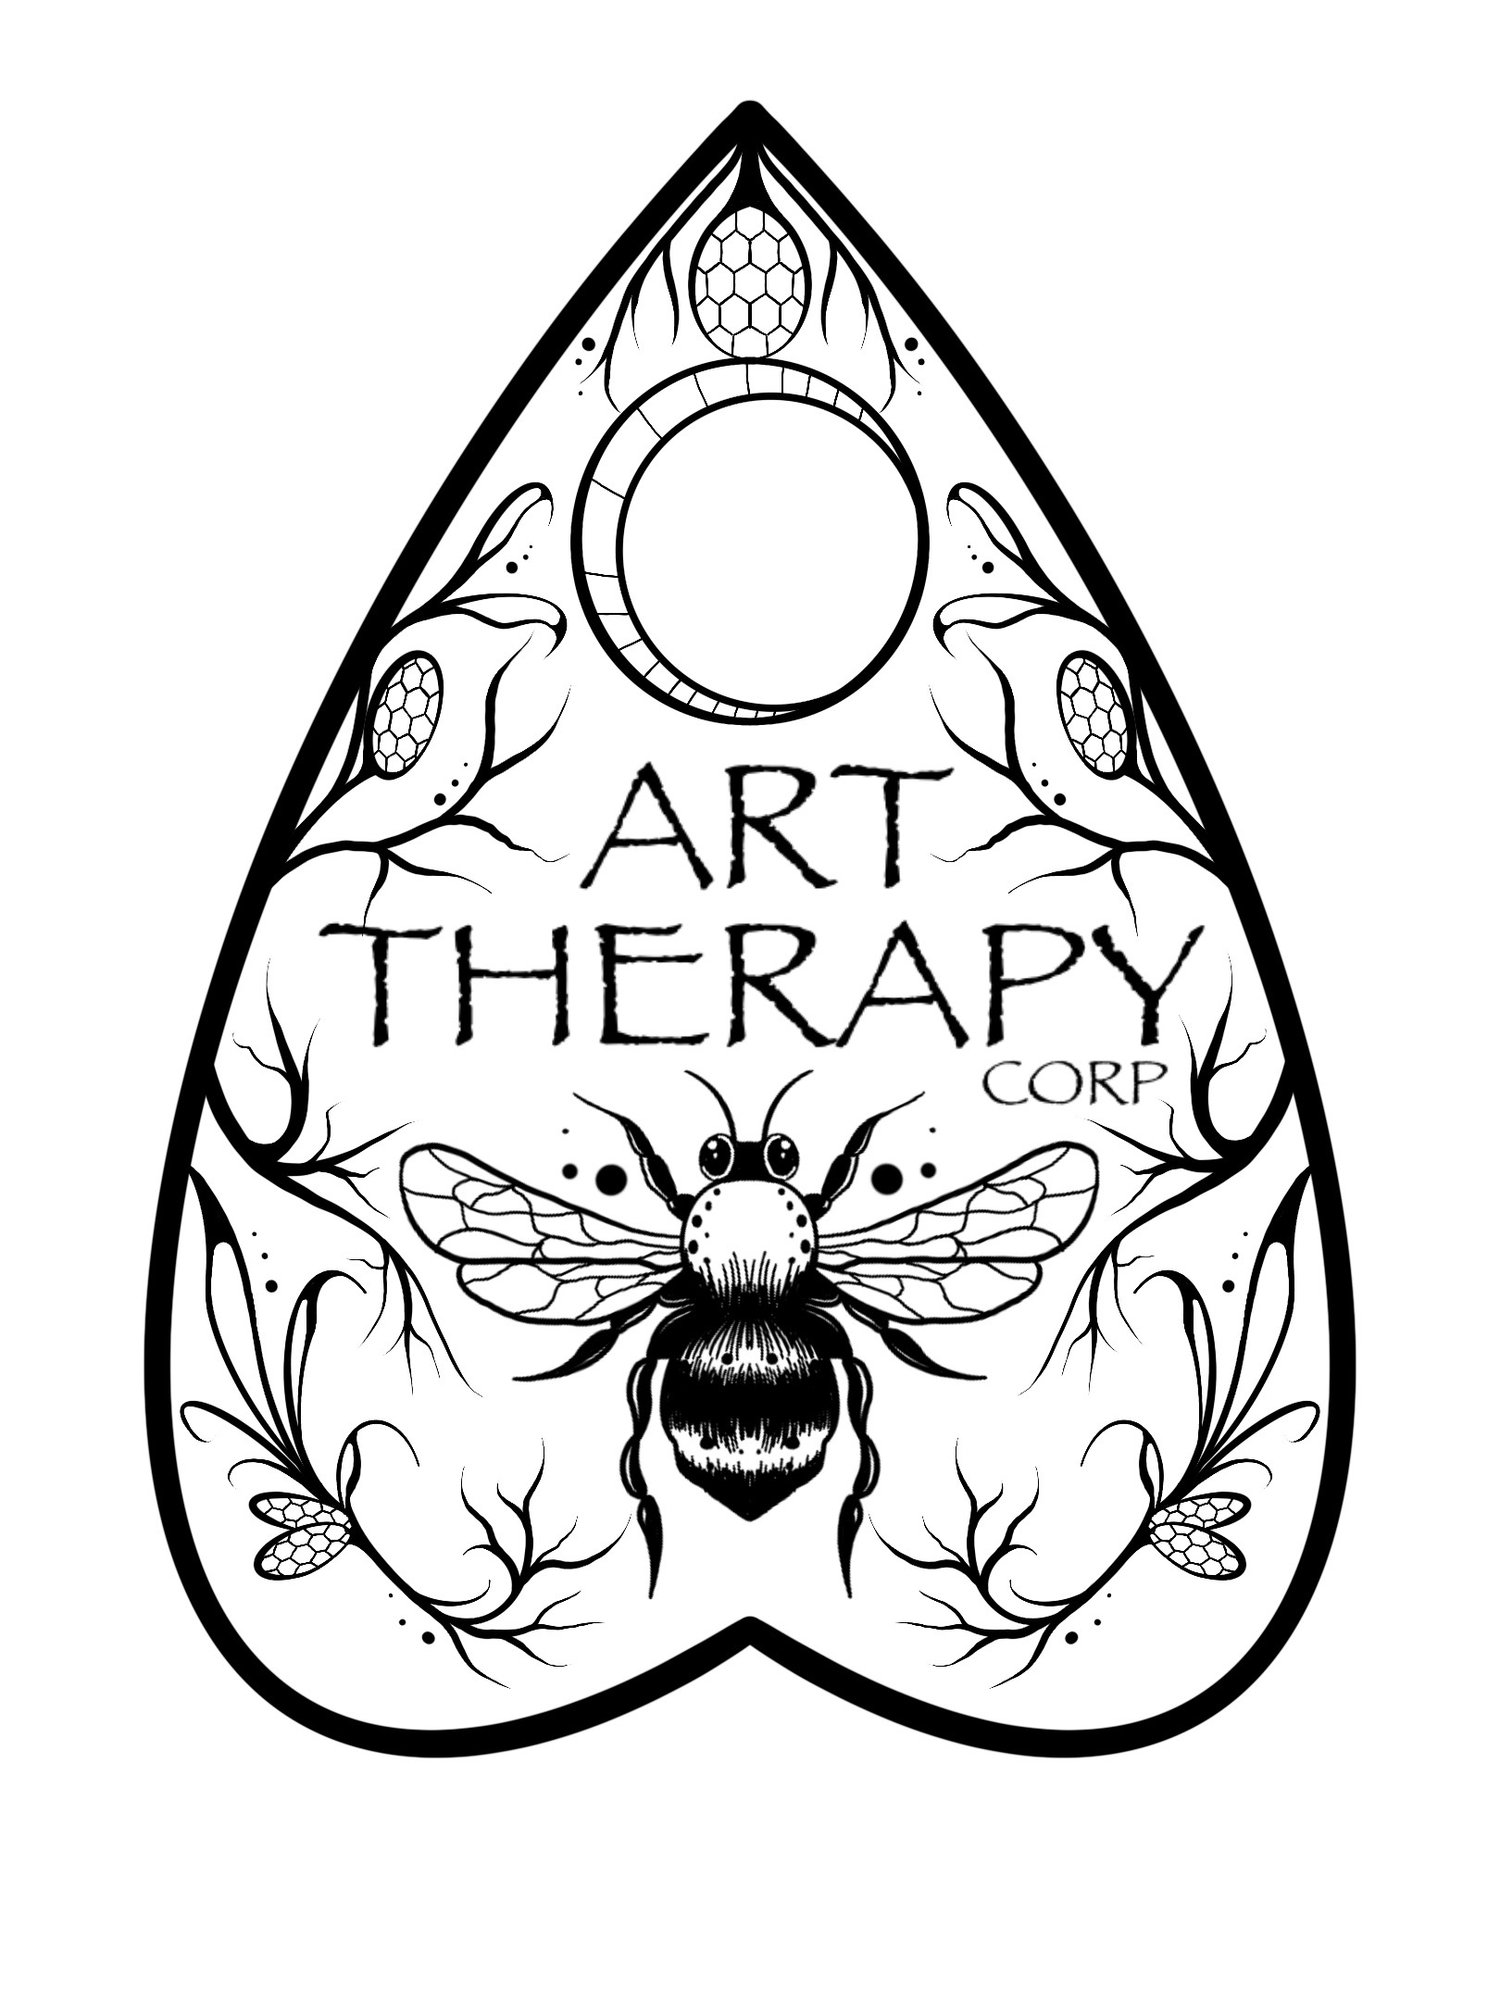 Art Therapy Corp Osoyoos